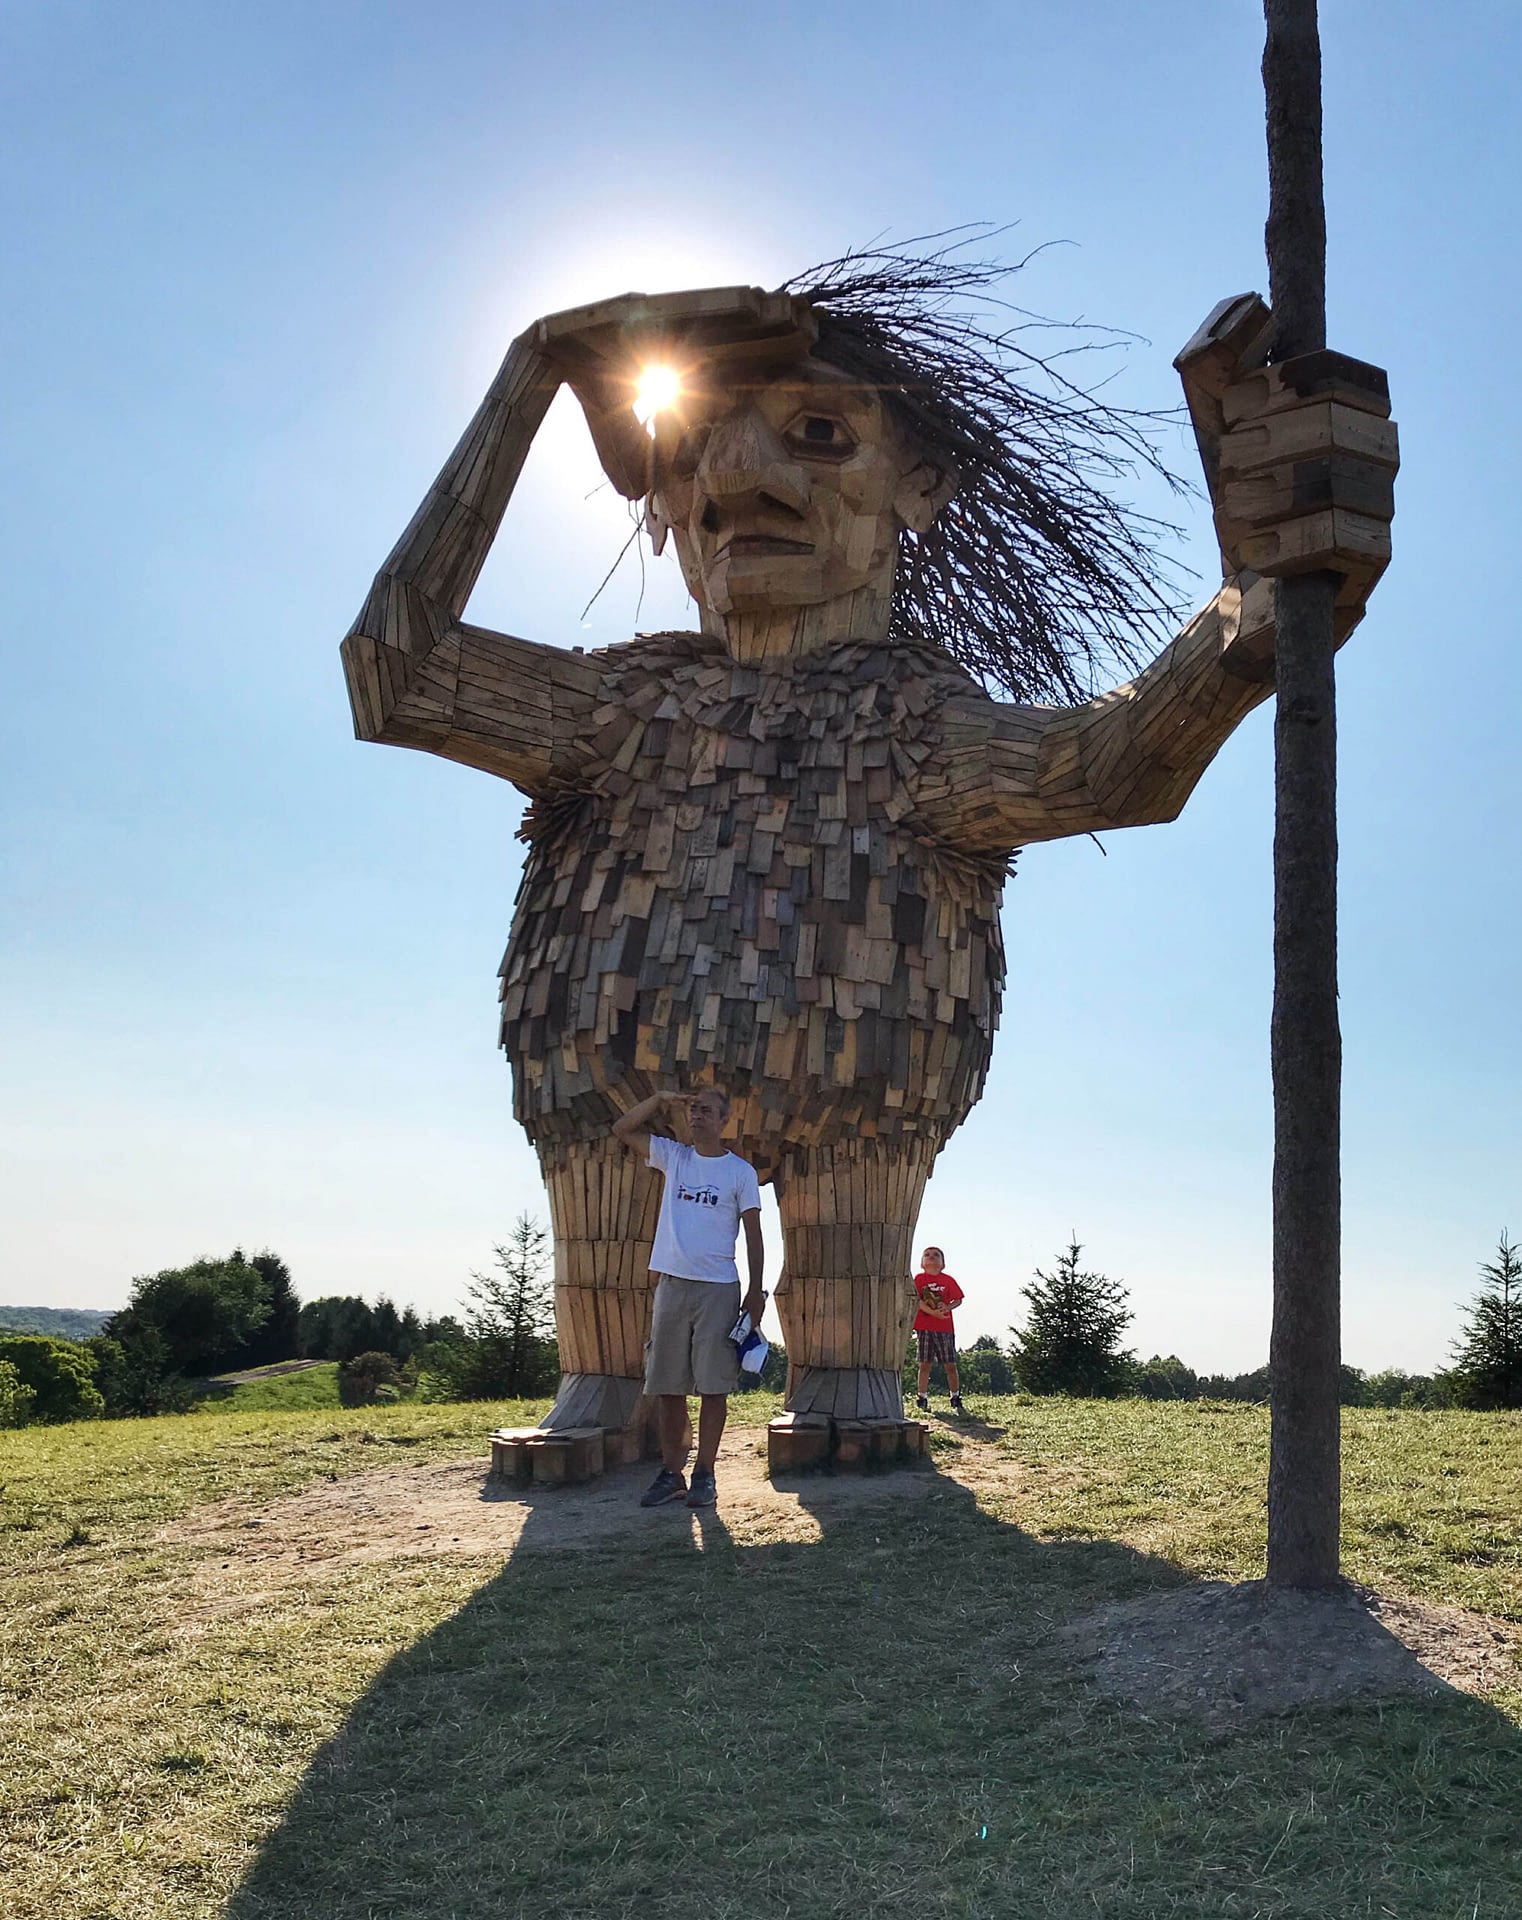 Image: A Troll made out of recycled wood stands 10 meters high in the sunshine.